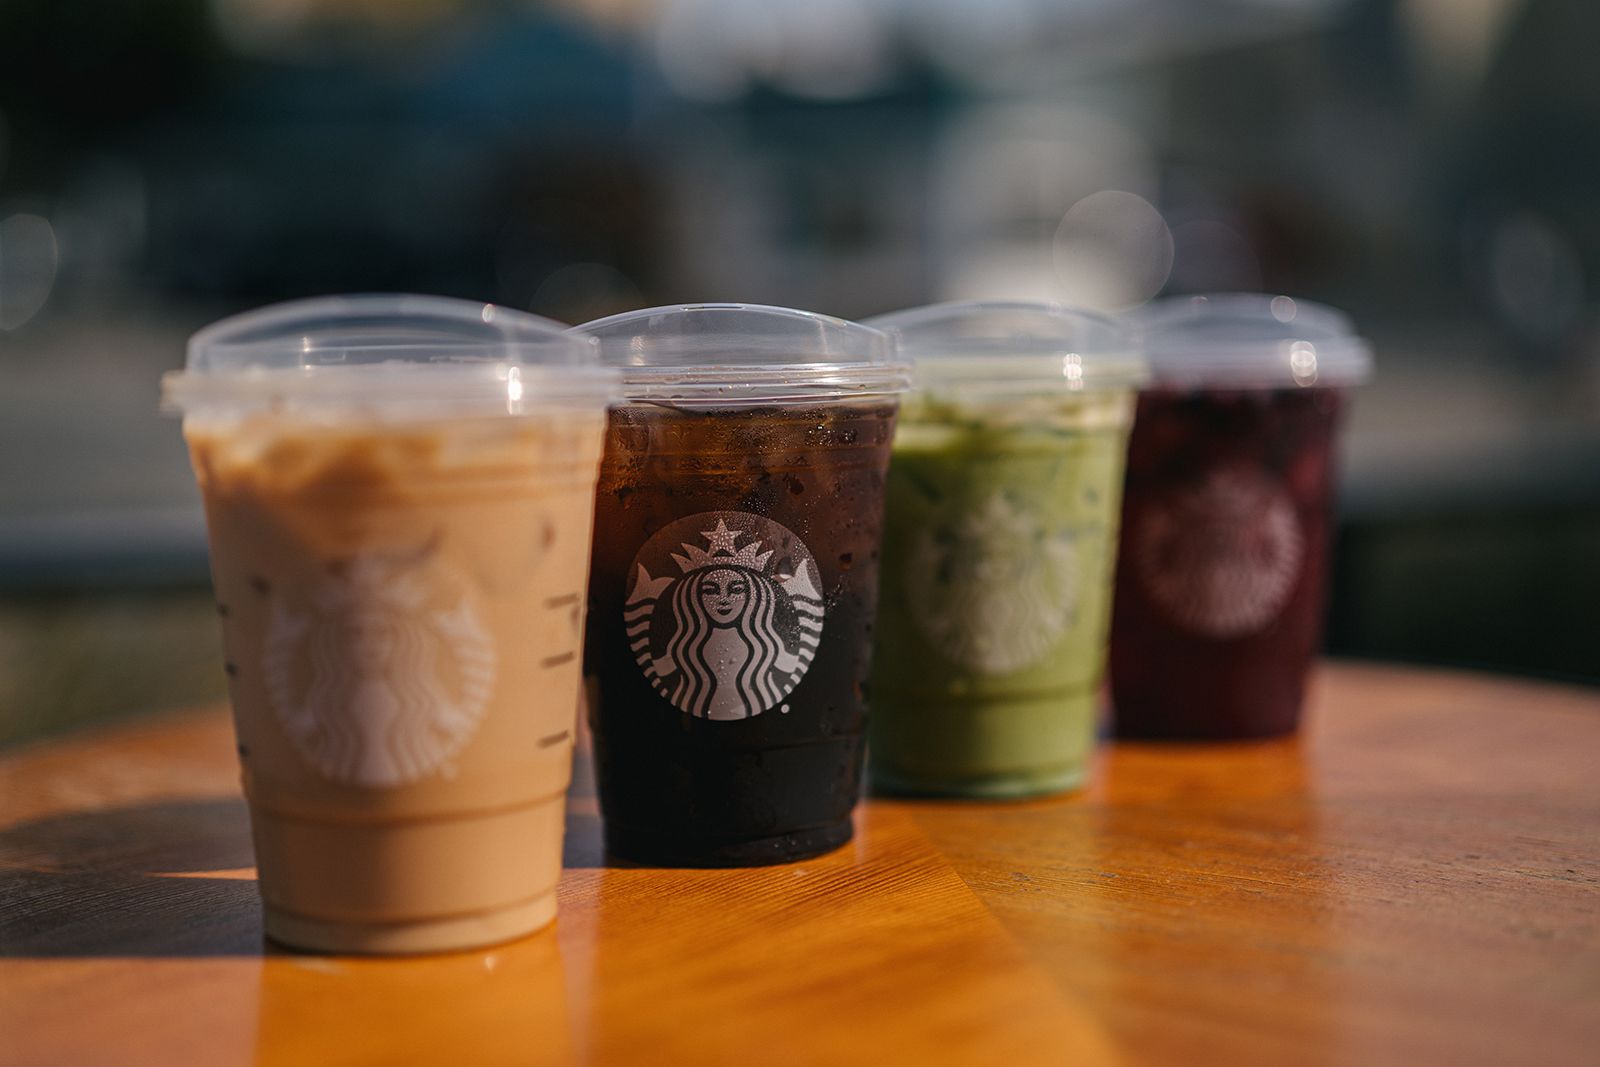 Starbucks has officially abandoned straws in favor of sippy cup